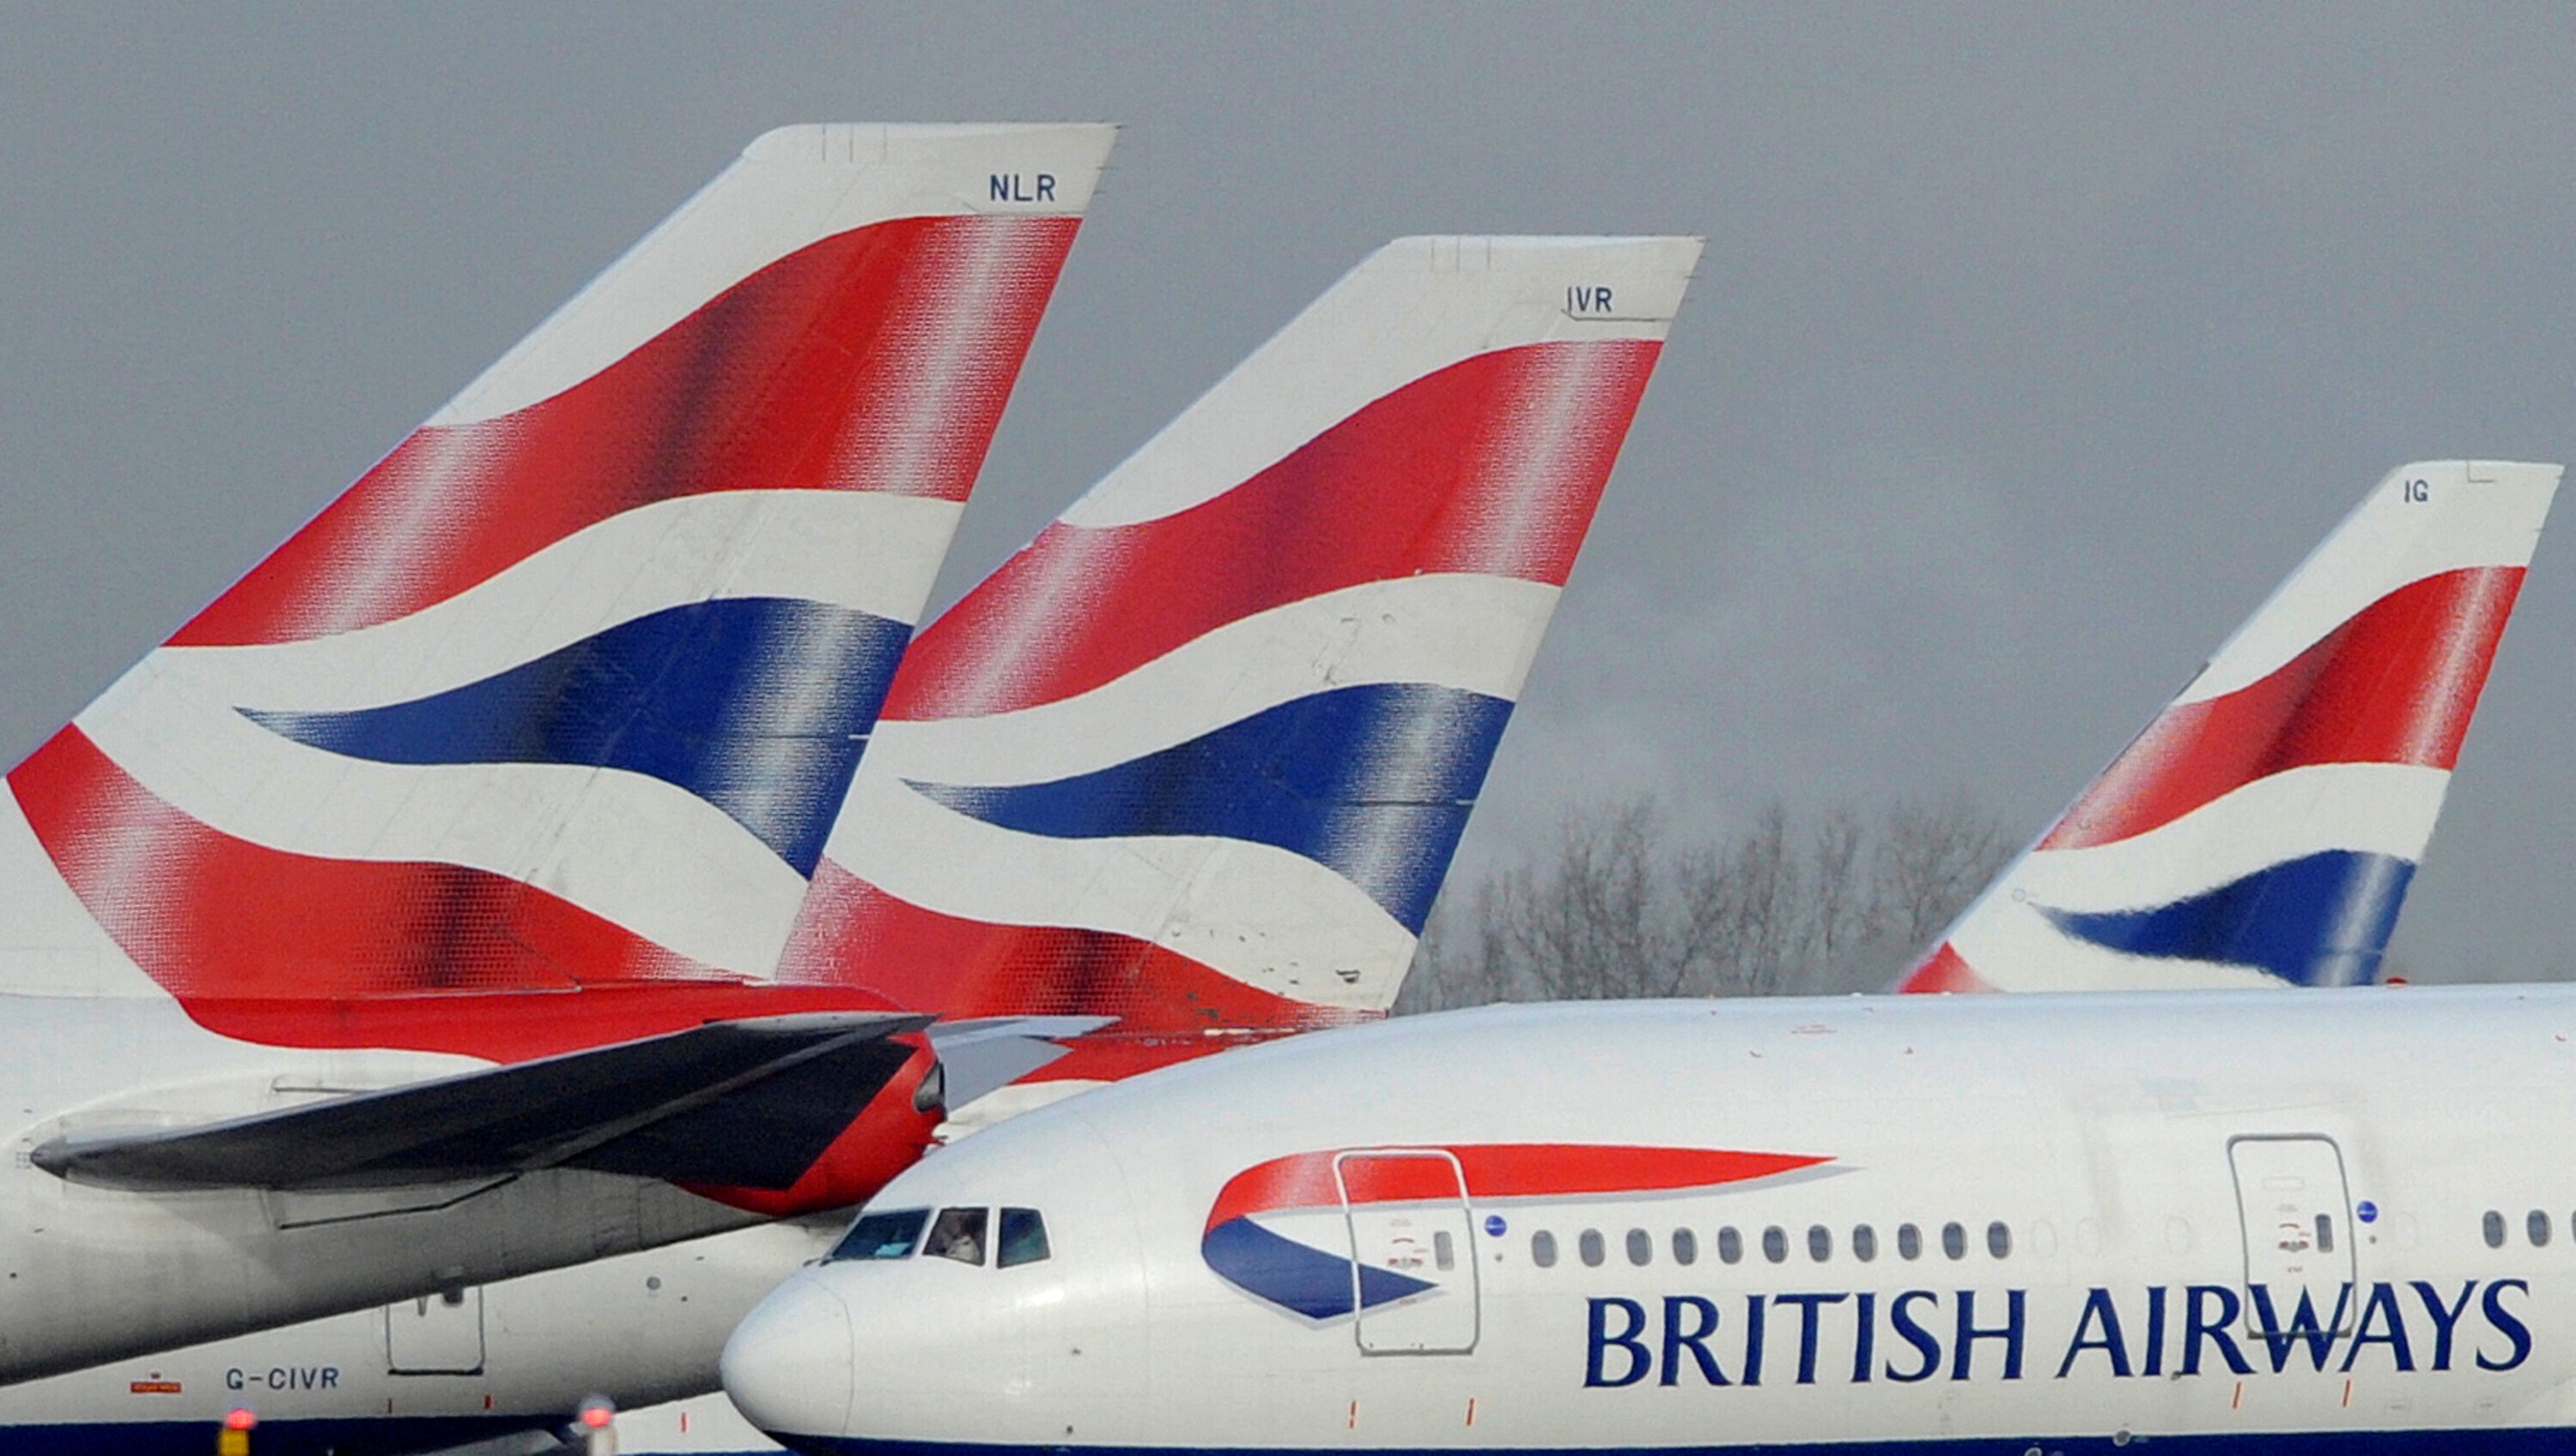 British Airways avoiding Russian airspace for overflights, IAG CEO says |  Reuters